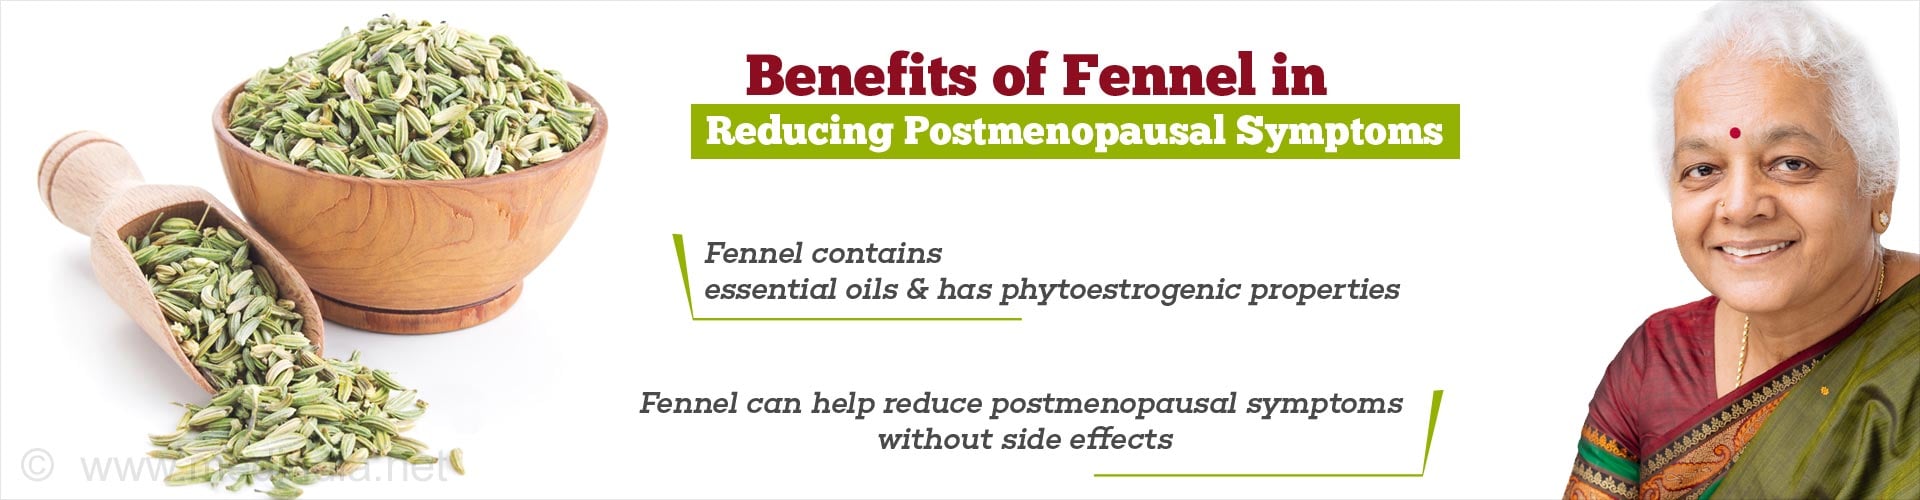 Benefits of Fennel in Reducing Postmenopausal Symptoms
- Fennel contains essential oils and has phytoestrogenic properties
- Fennel can help reduce postmenopausal symptoms without side effects